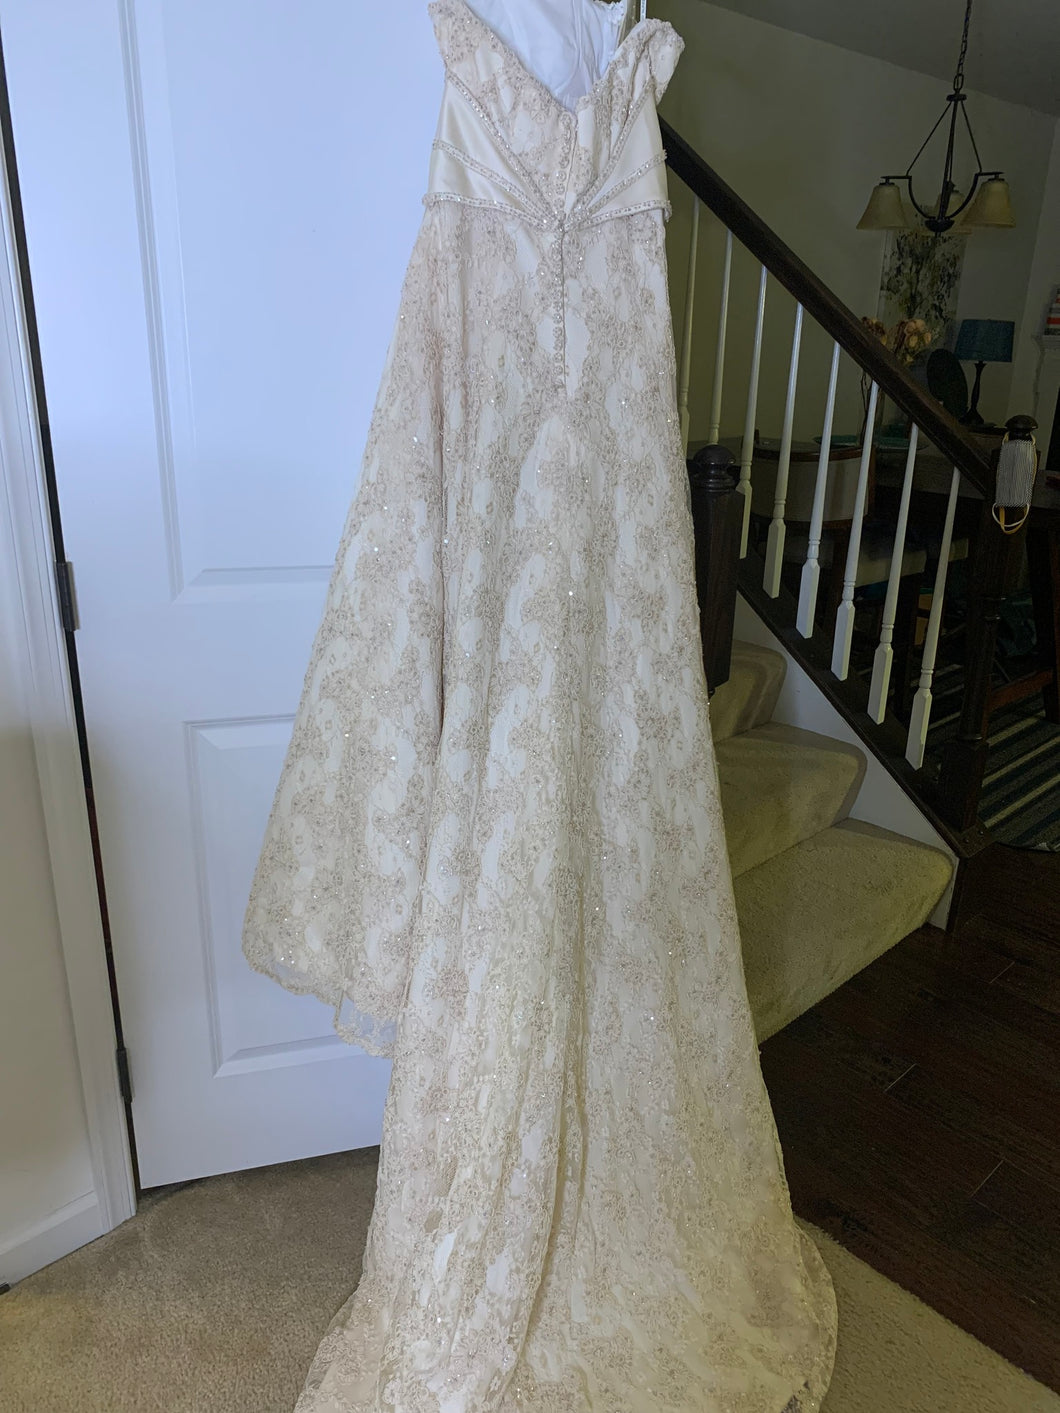 Alfred Sung '6671 Bridal Collection' wedding dress size-08 NEW